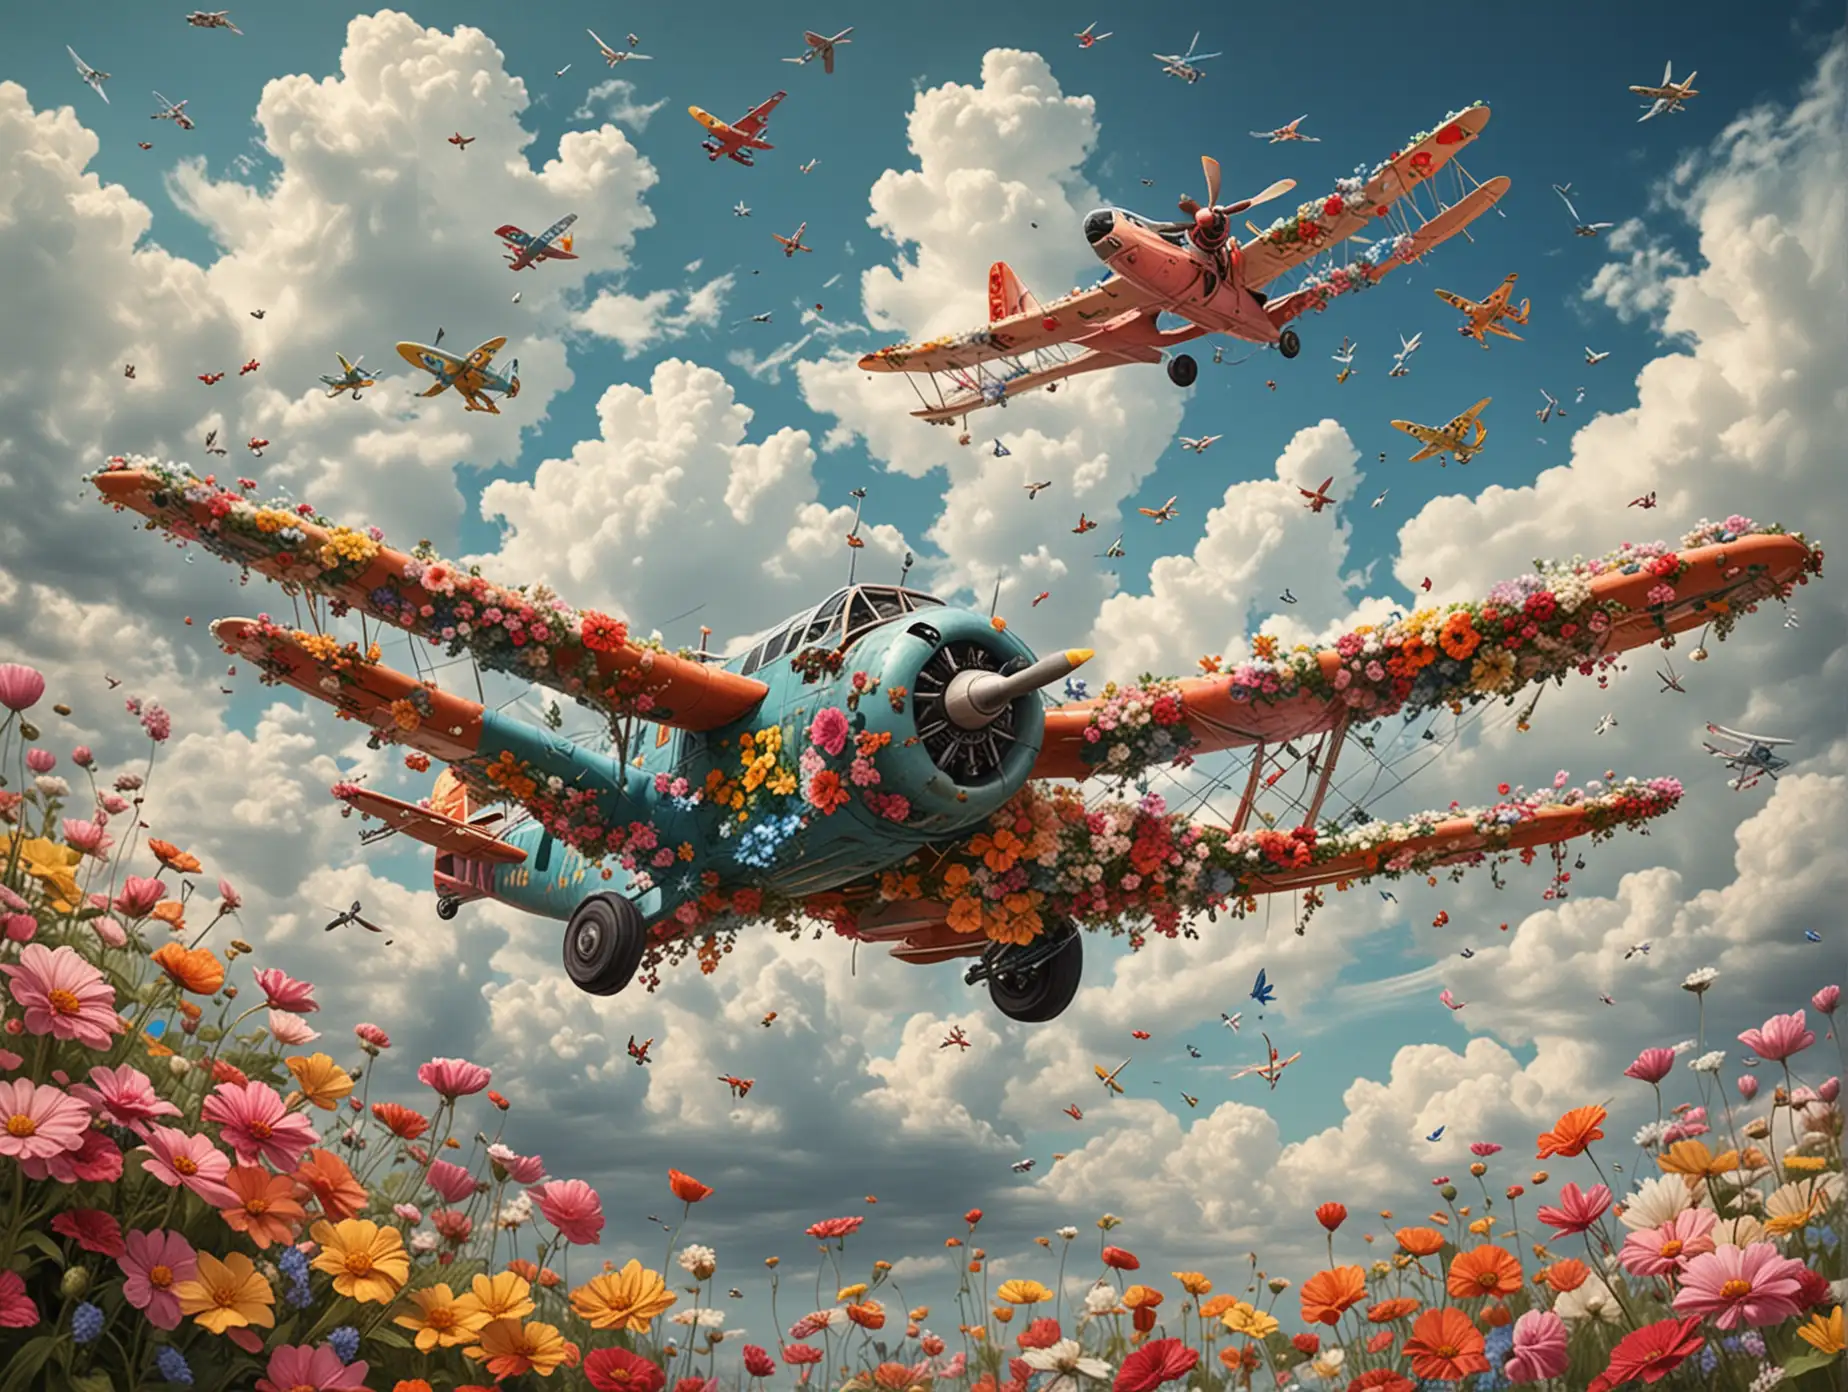 Whimsical airplanes in a sky full of flowers